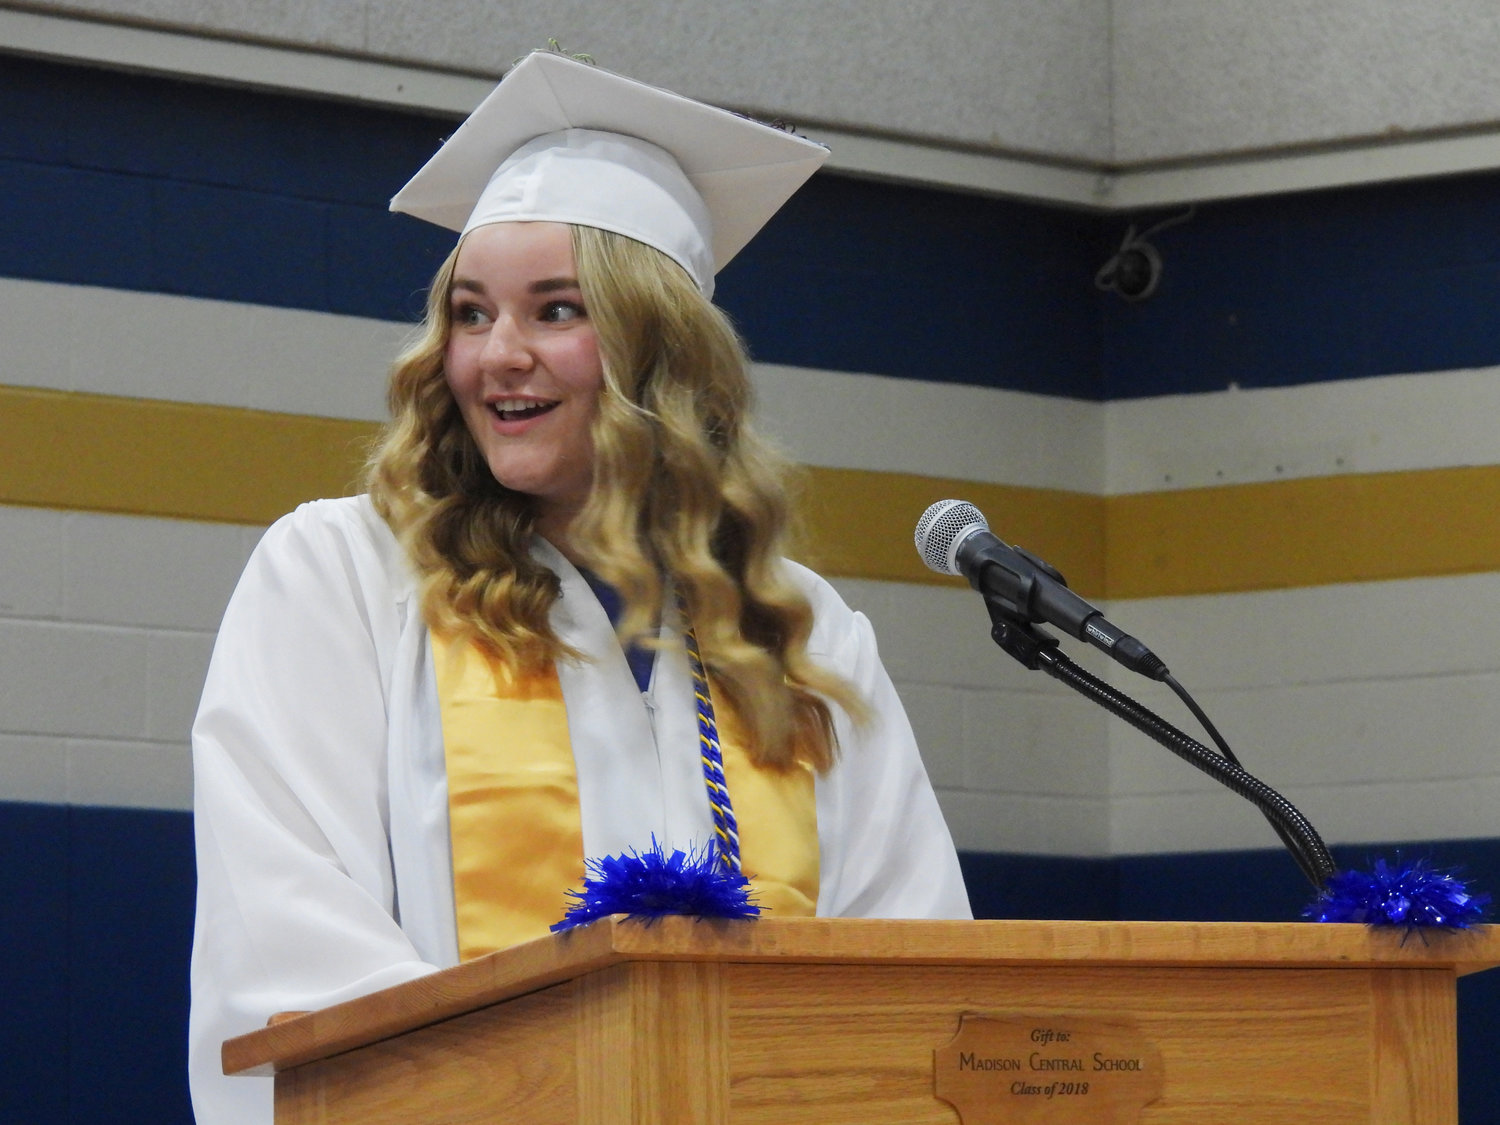 Madison Central's Class of 2022 start the next chapter of their lives, doffing their caps and celebrating their graduation on Friday, June 24. Pictured is Class President Jayden Miers, speaking to the graduating class